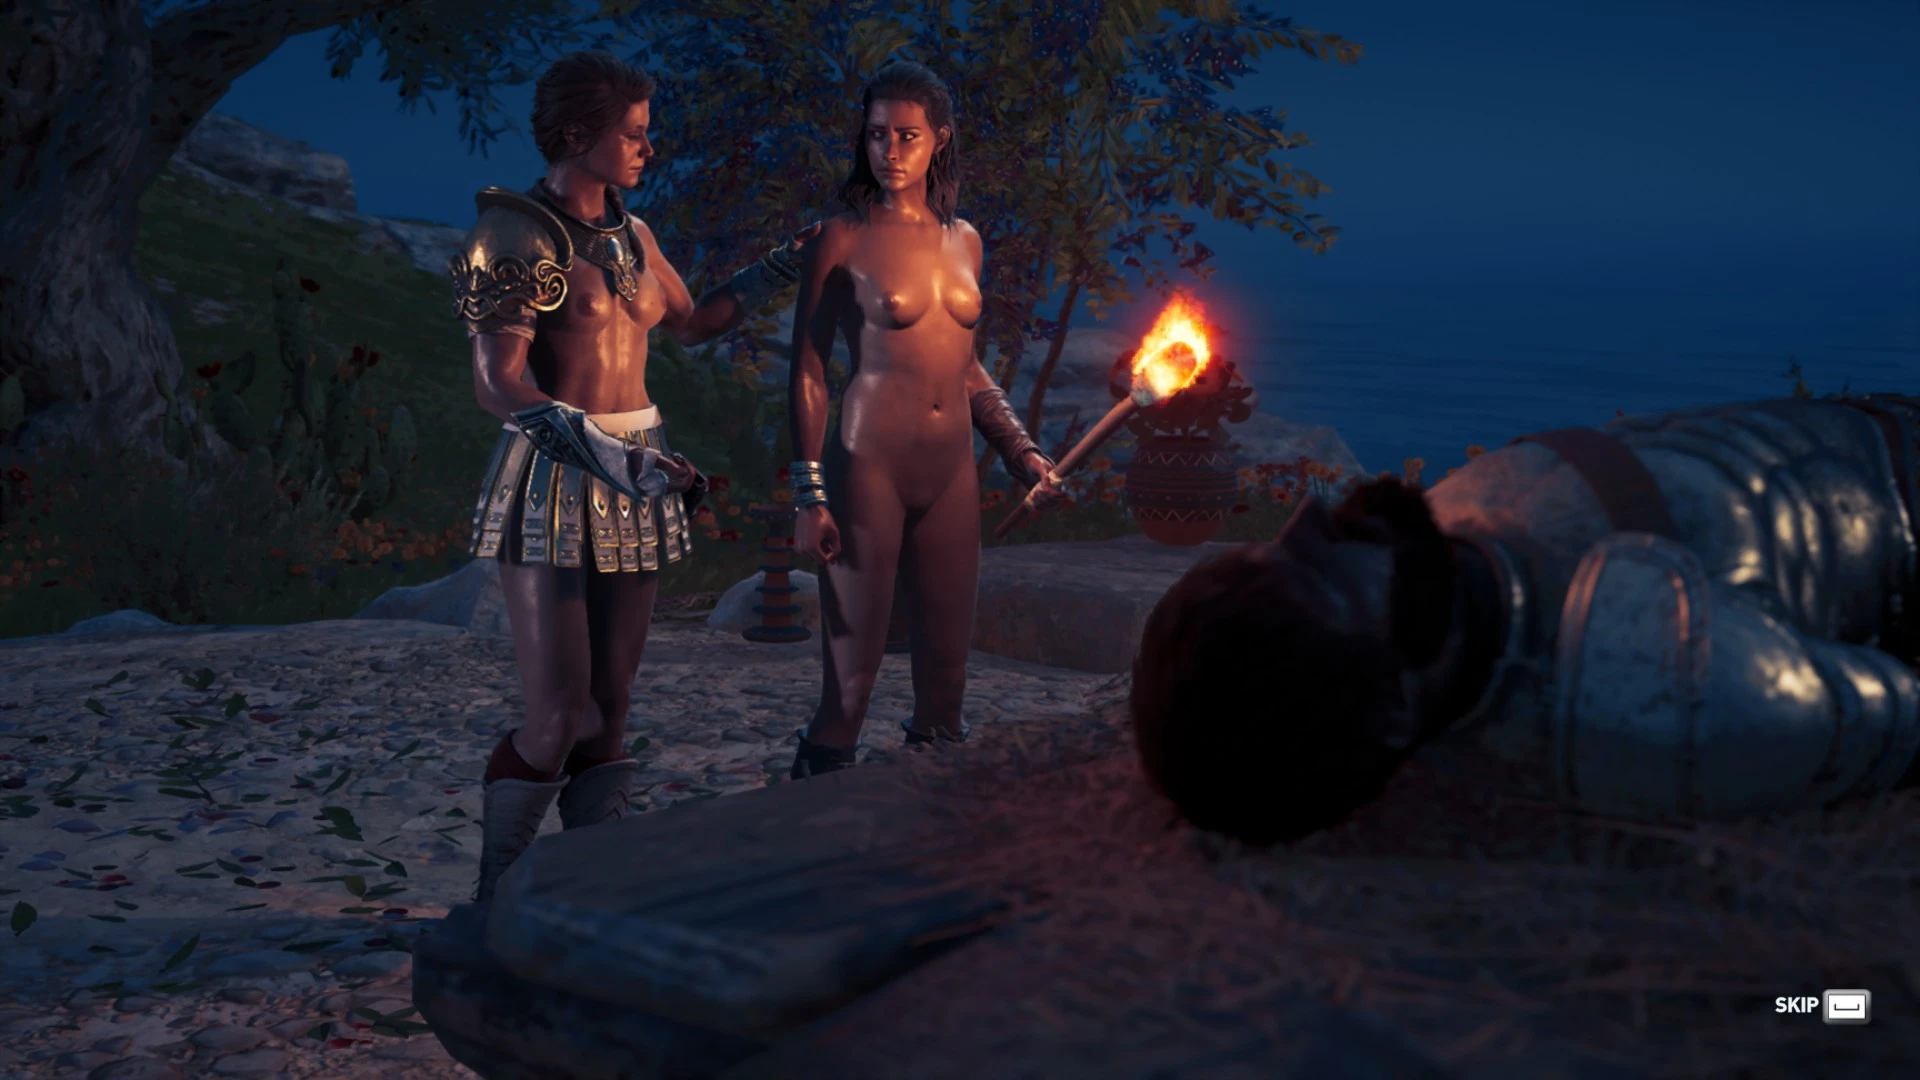 Futanari Transgender Shemale Mod For Assassin S Creed Odyssey Requests Adult Gaming